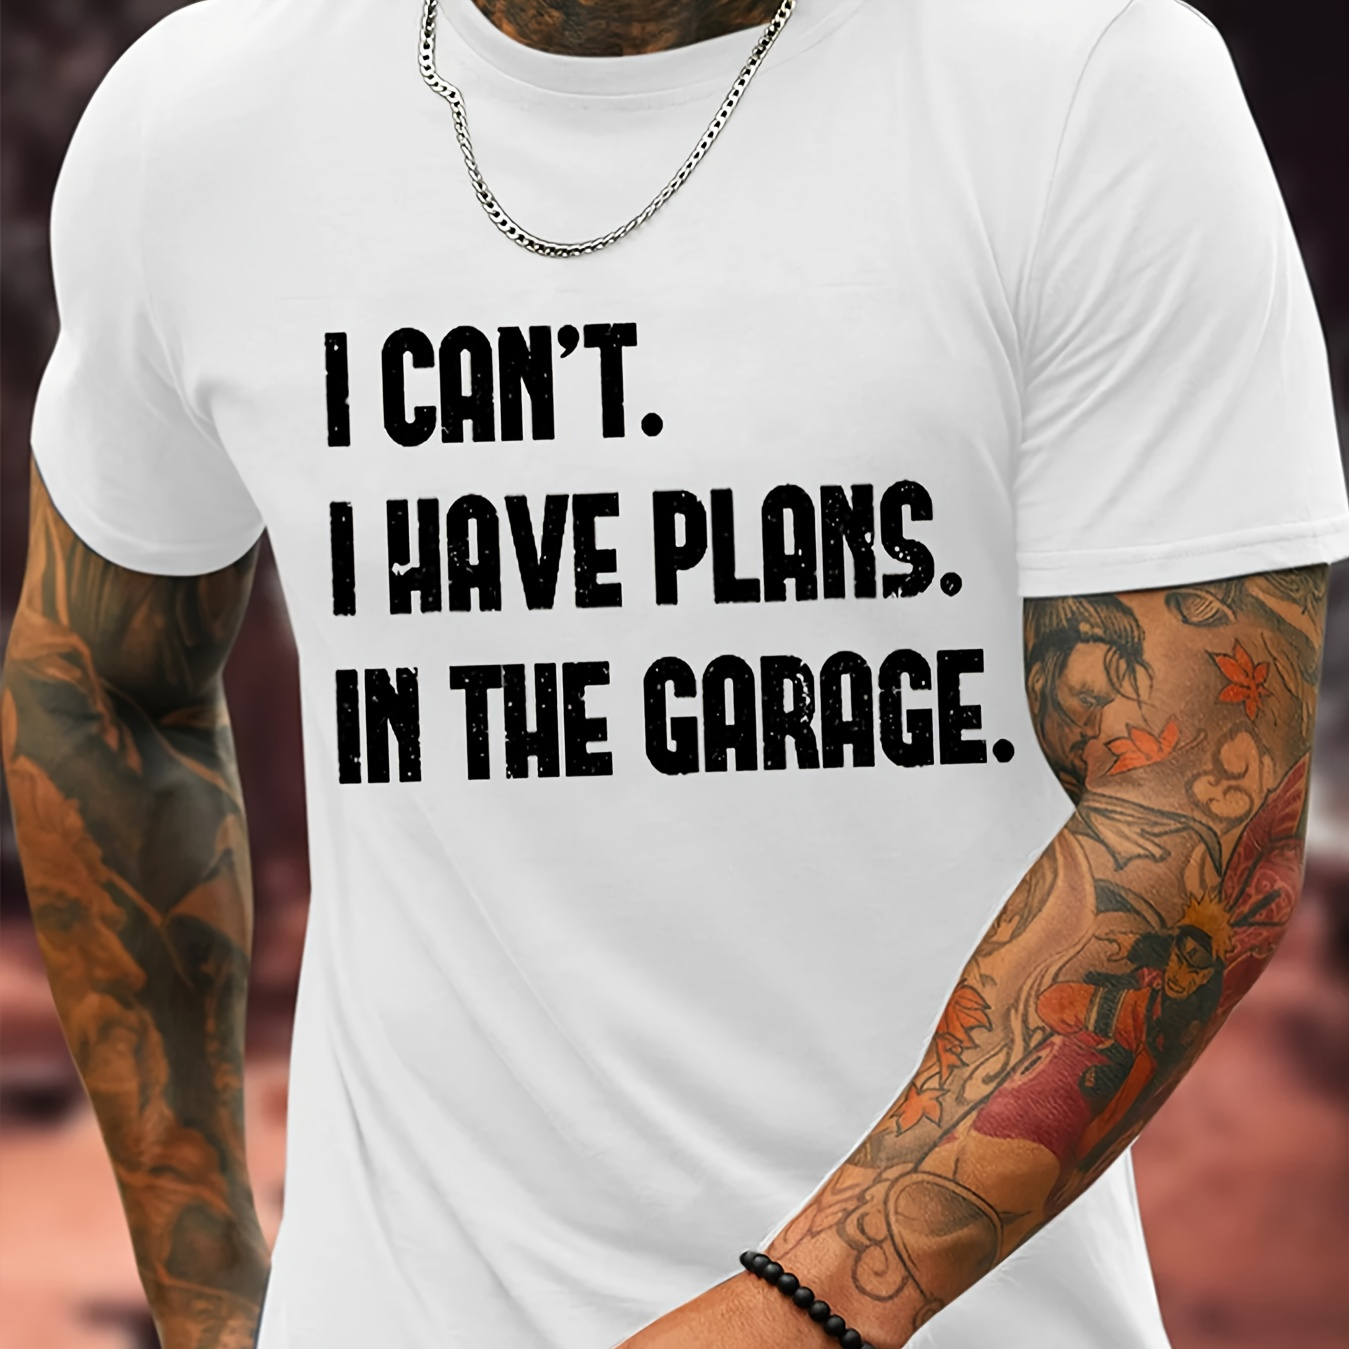 

I Can't I Have Plans In The Garage Print, Men's Comfy T-shirt, Casual Fit Tees For Summer, Men's Clothing Tops For Daily Activities